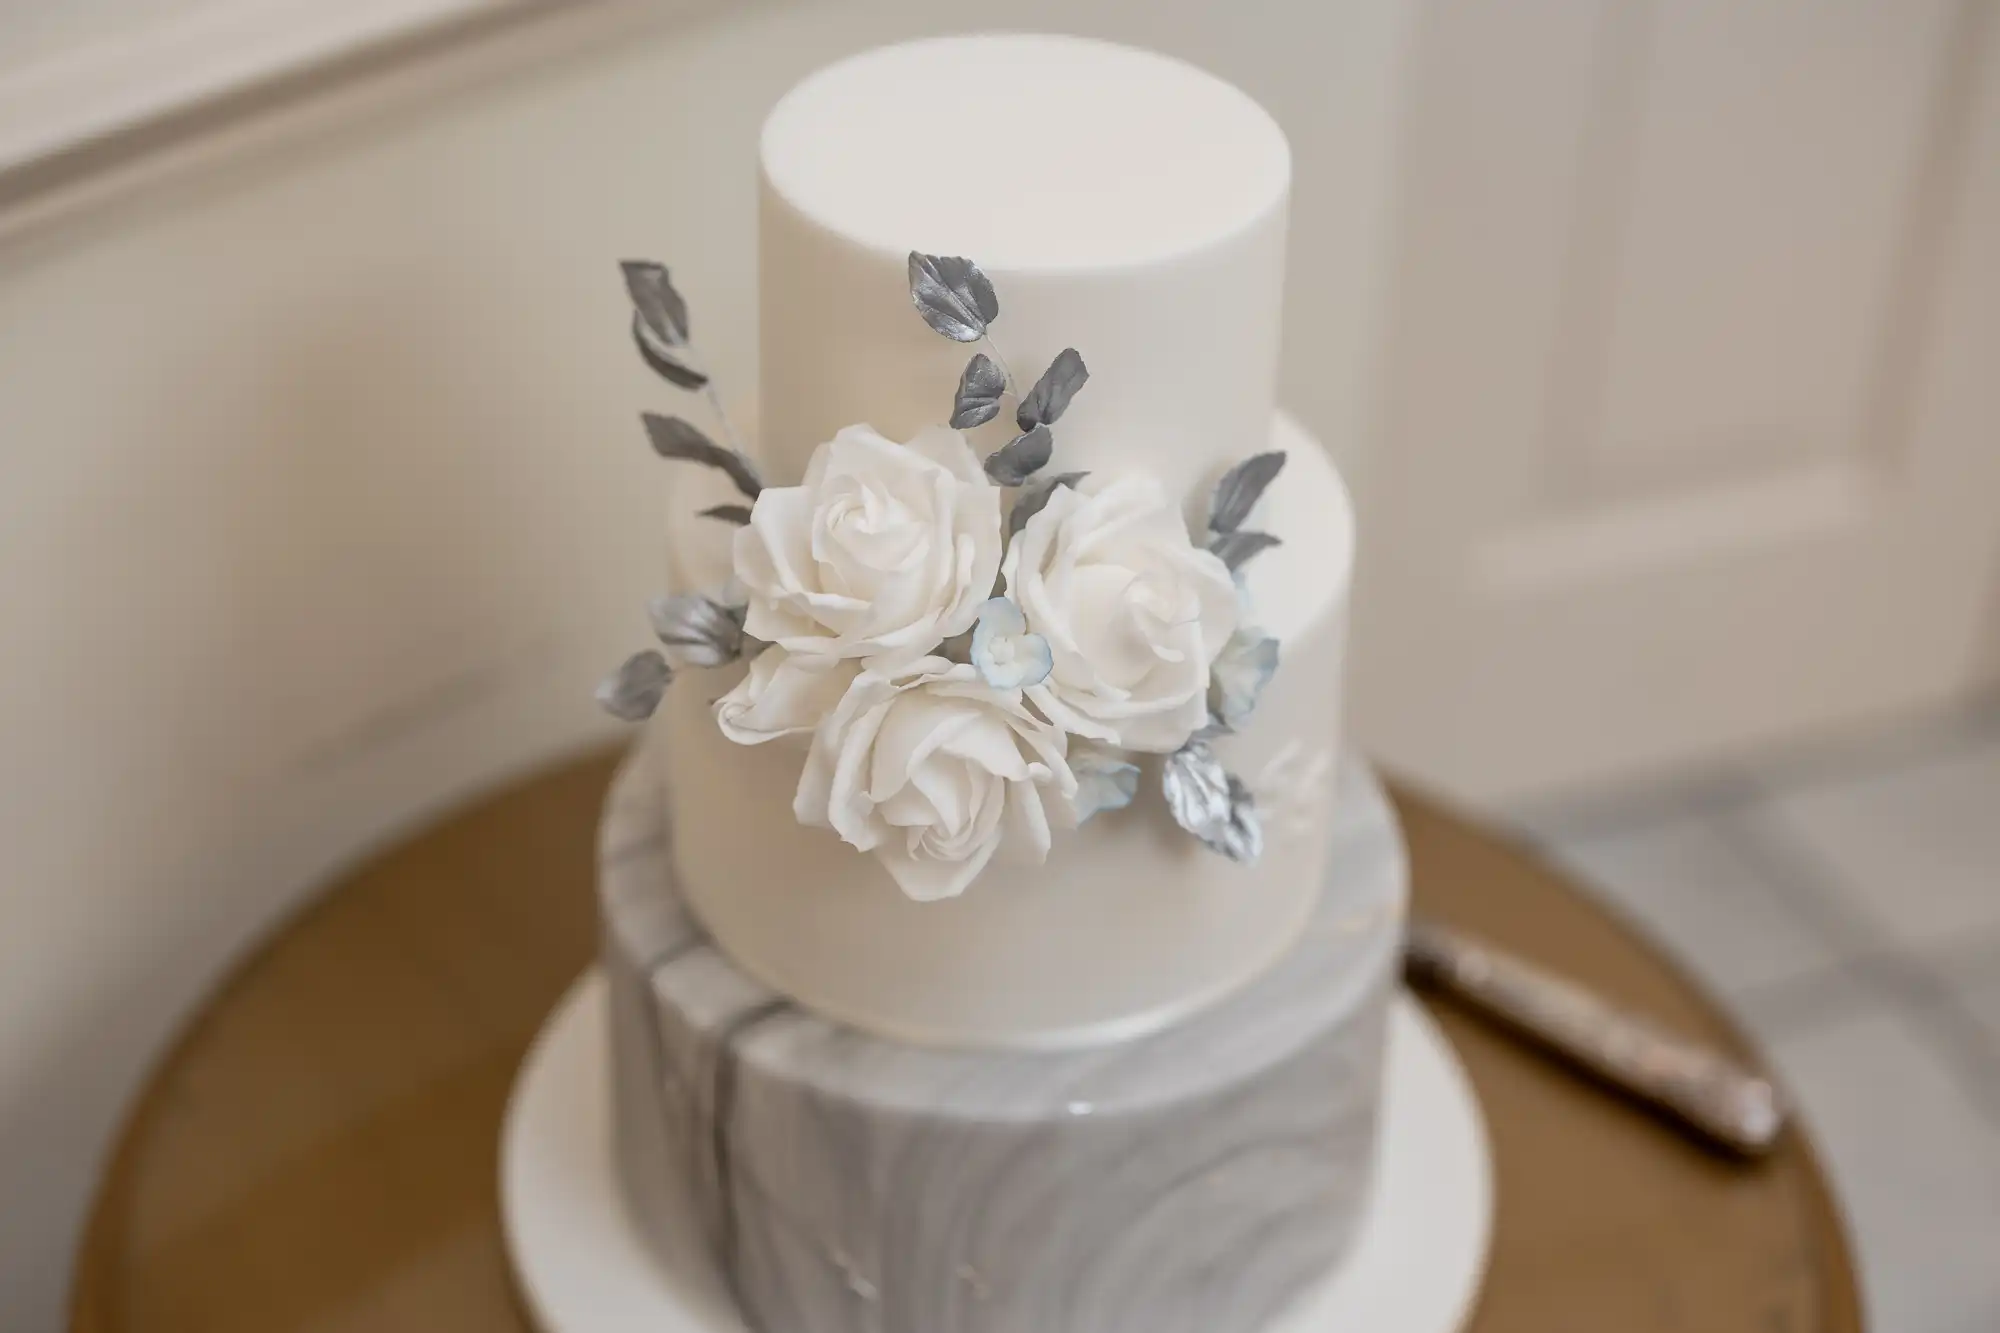 A two-tiered wedding cake with white and gray fondant, decorated with sugarcrafted white roses and gray leaves, displayed on a golden stand.